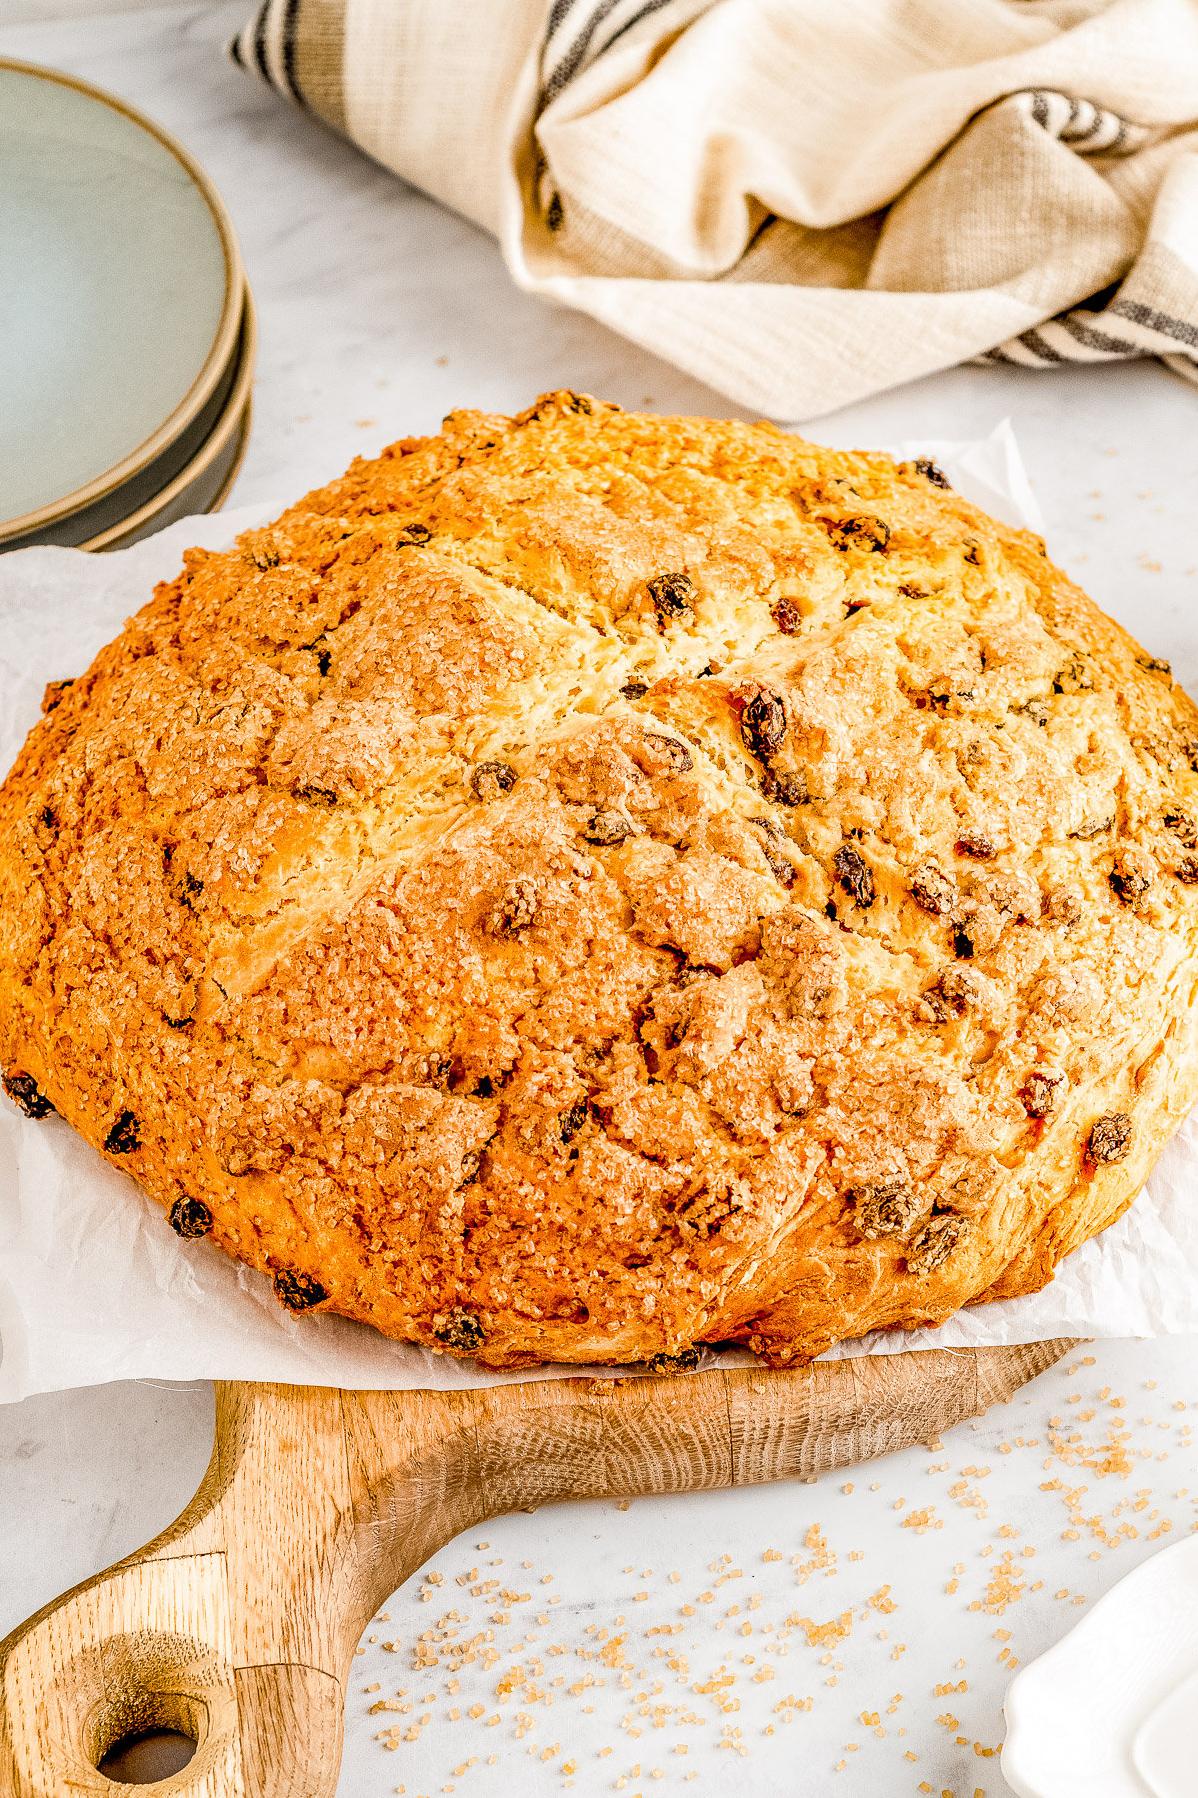  Smear a slice of Irish Applesauce Soda Bread with salted butter, and you're in for a soul-satisfying treat.